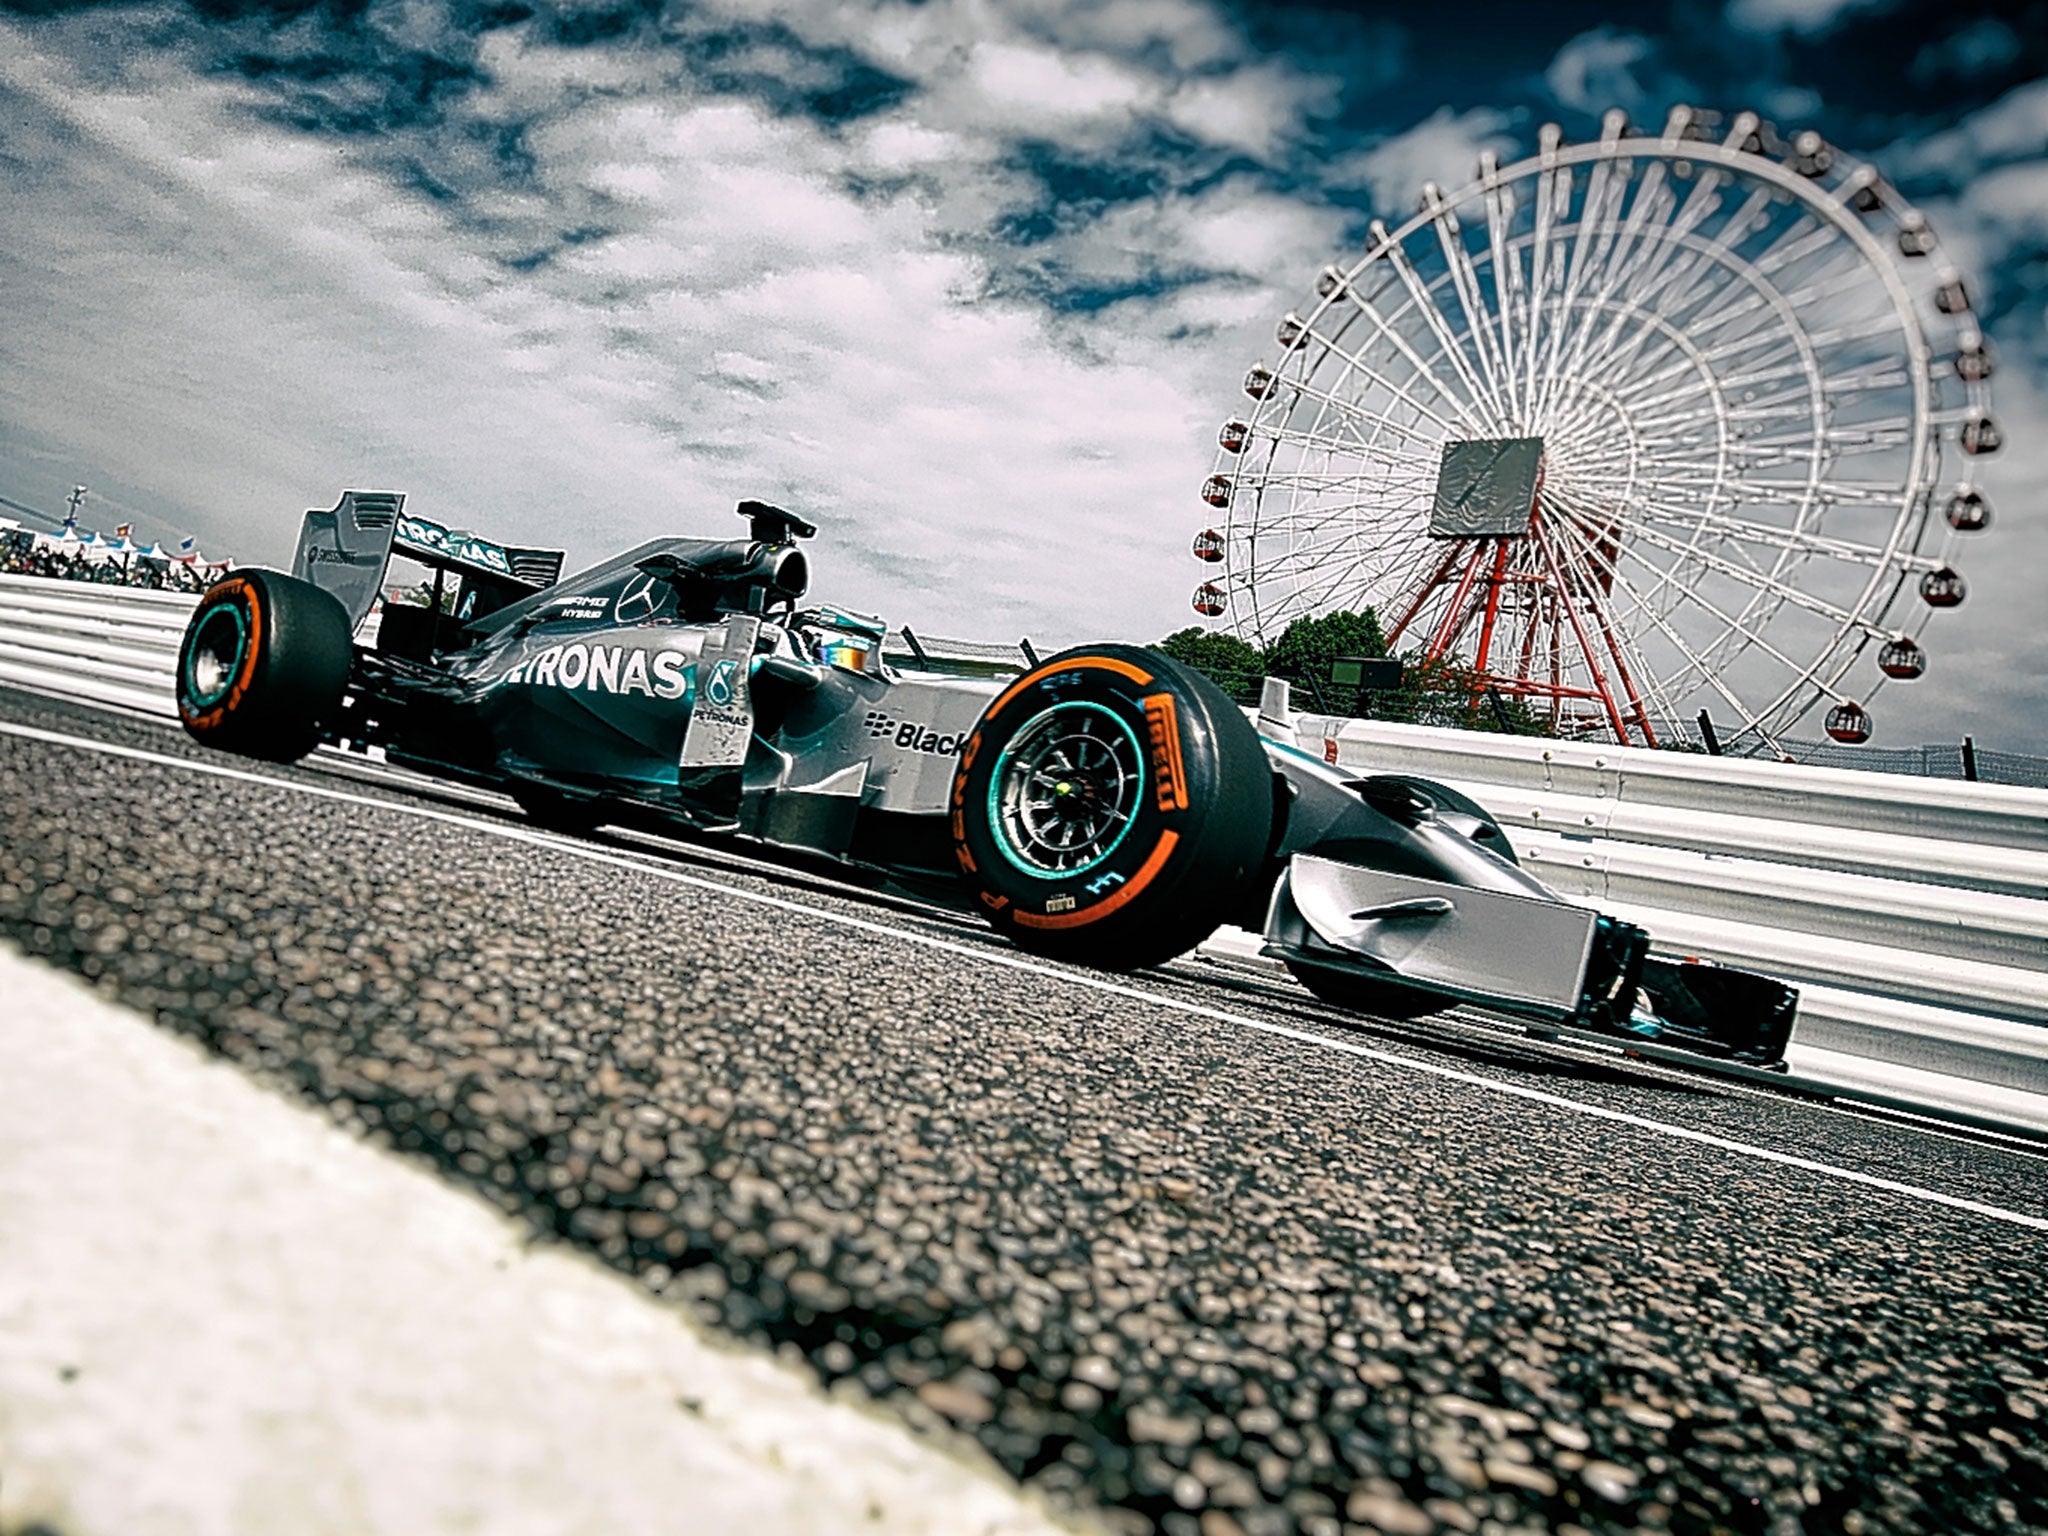 Lewis Hamilton in practice on Friday for the Japanese Grand Prix at Suzuka, where he shaded his main title rival to the day’s fastest time